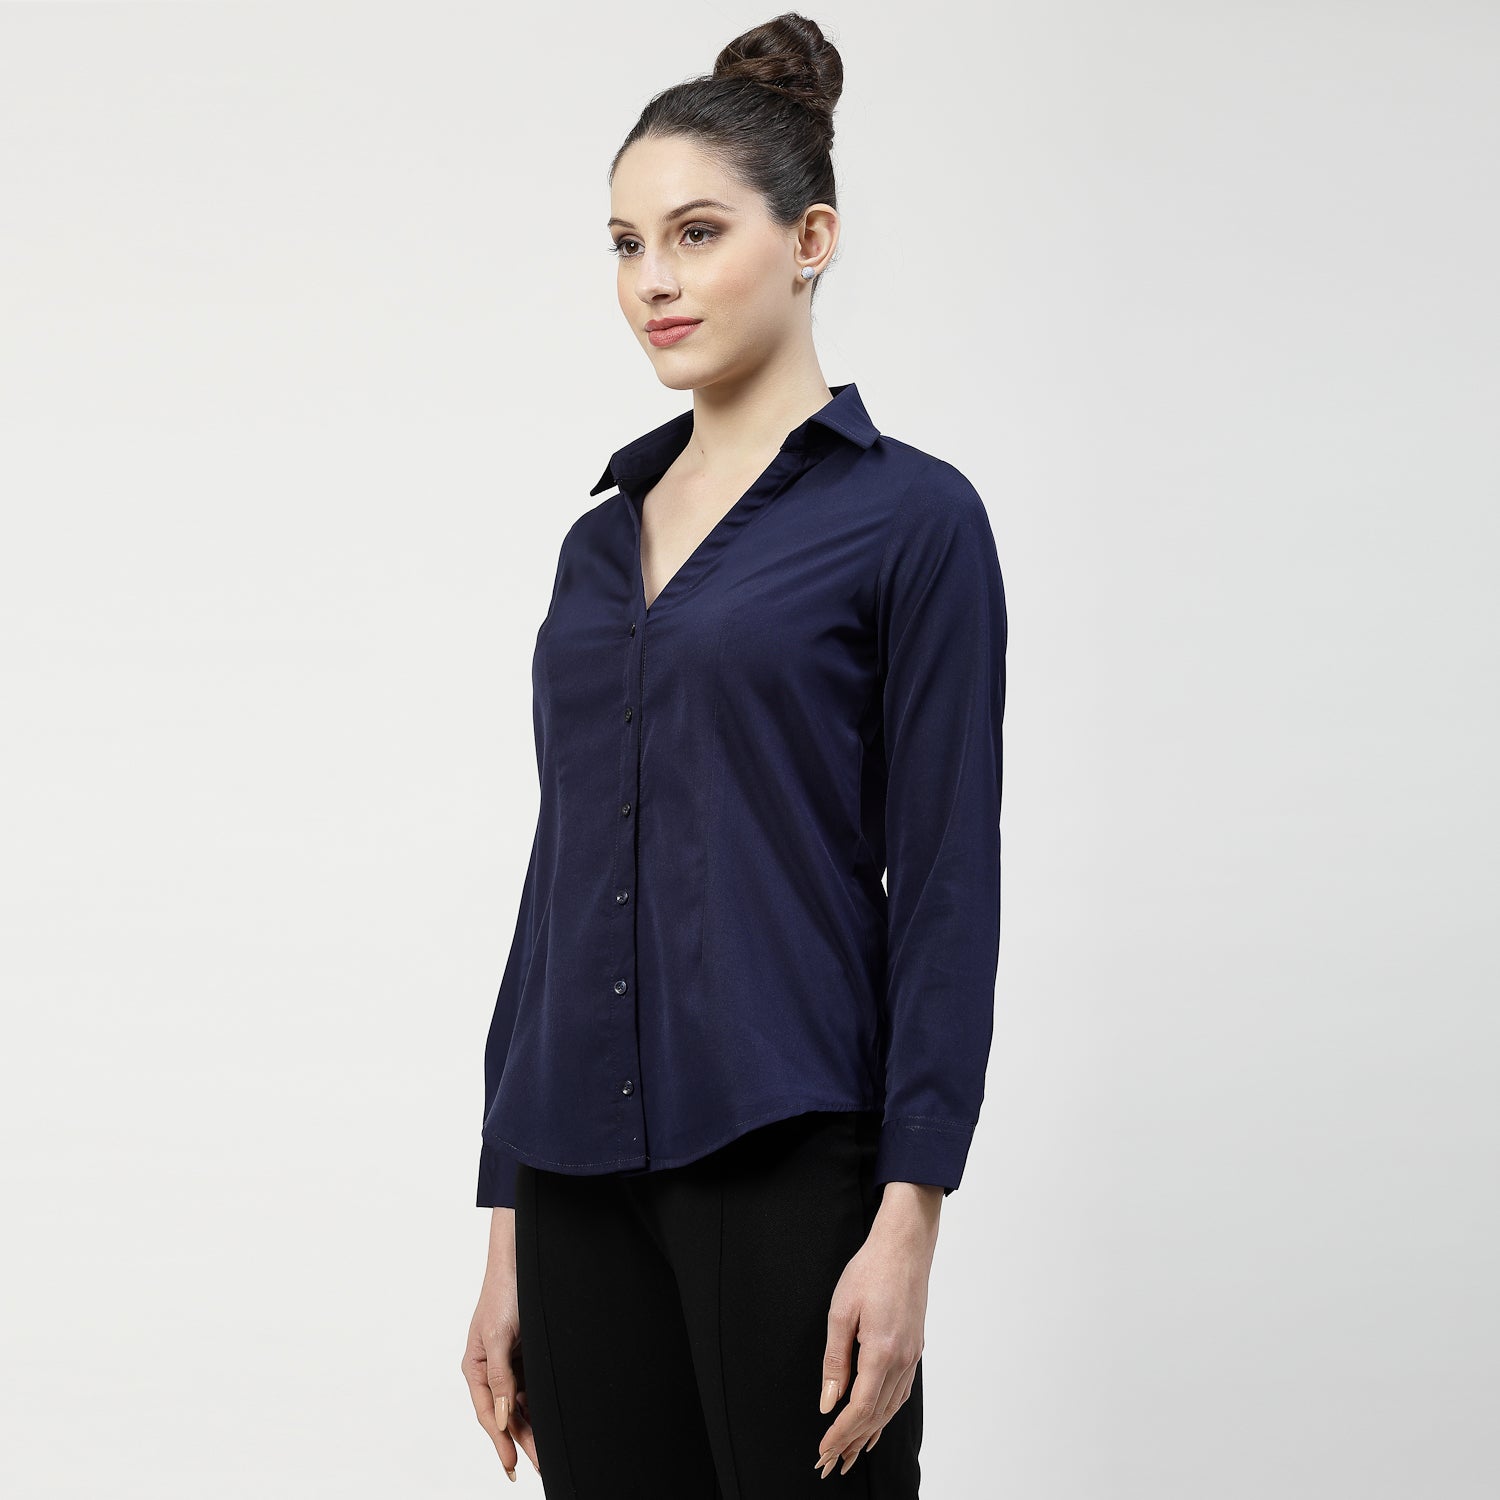 Blue V Neck Top With Collar